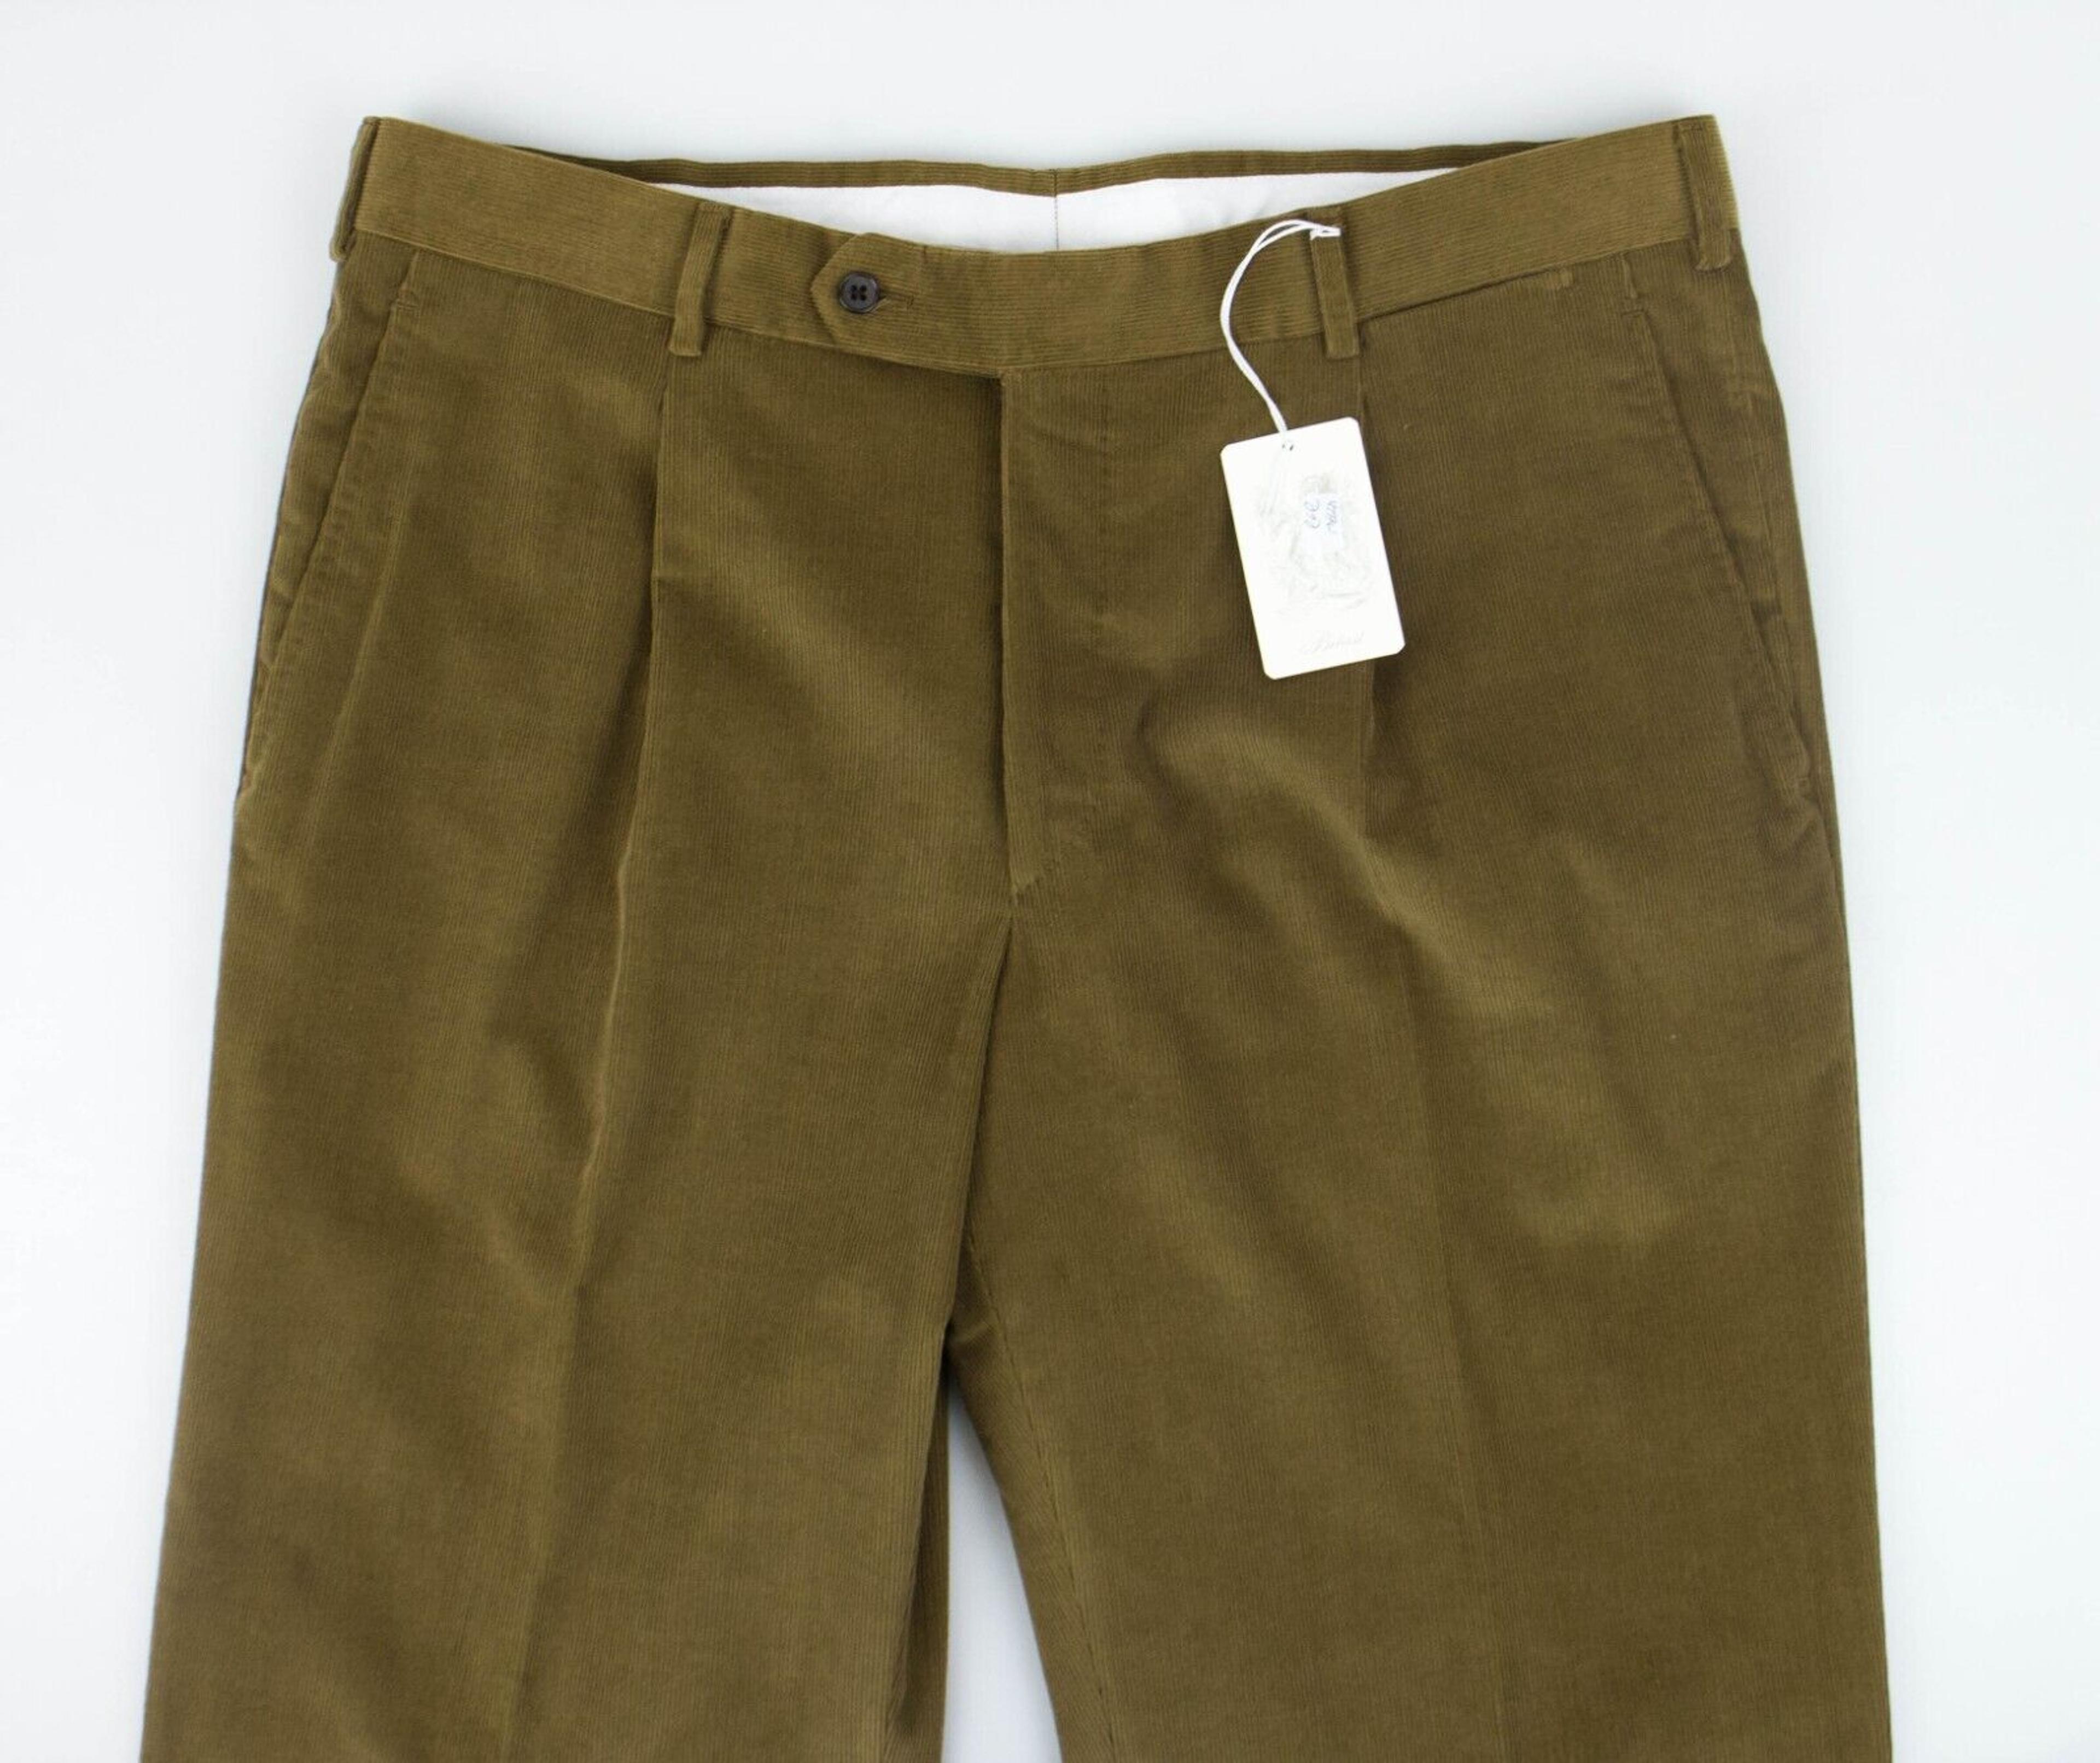 Alternate View 7 of Brown Cotton Blend Corduroy Casual Pants